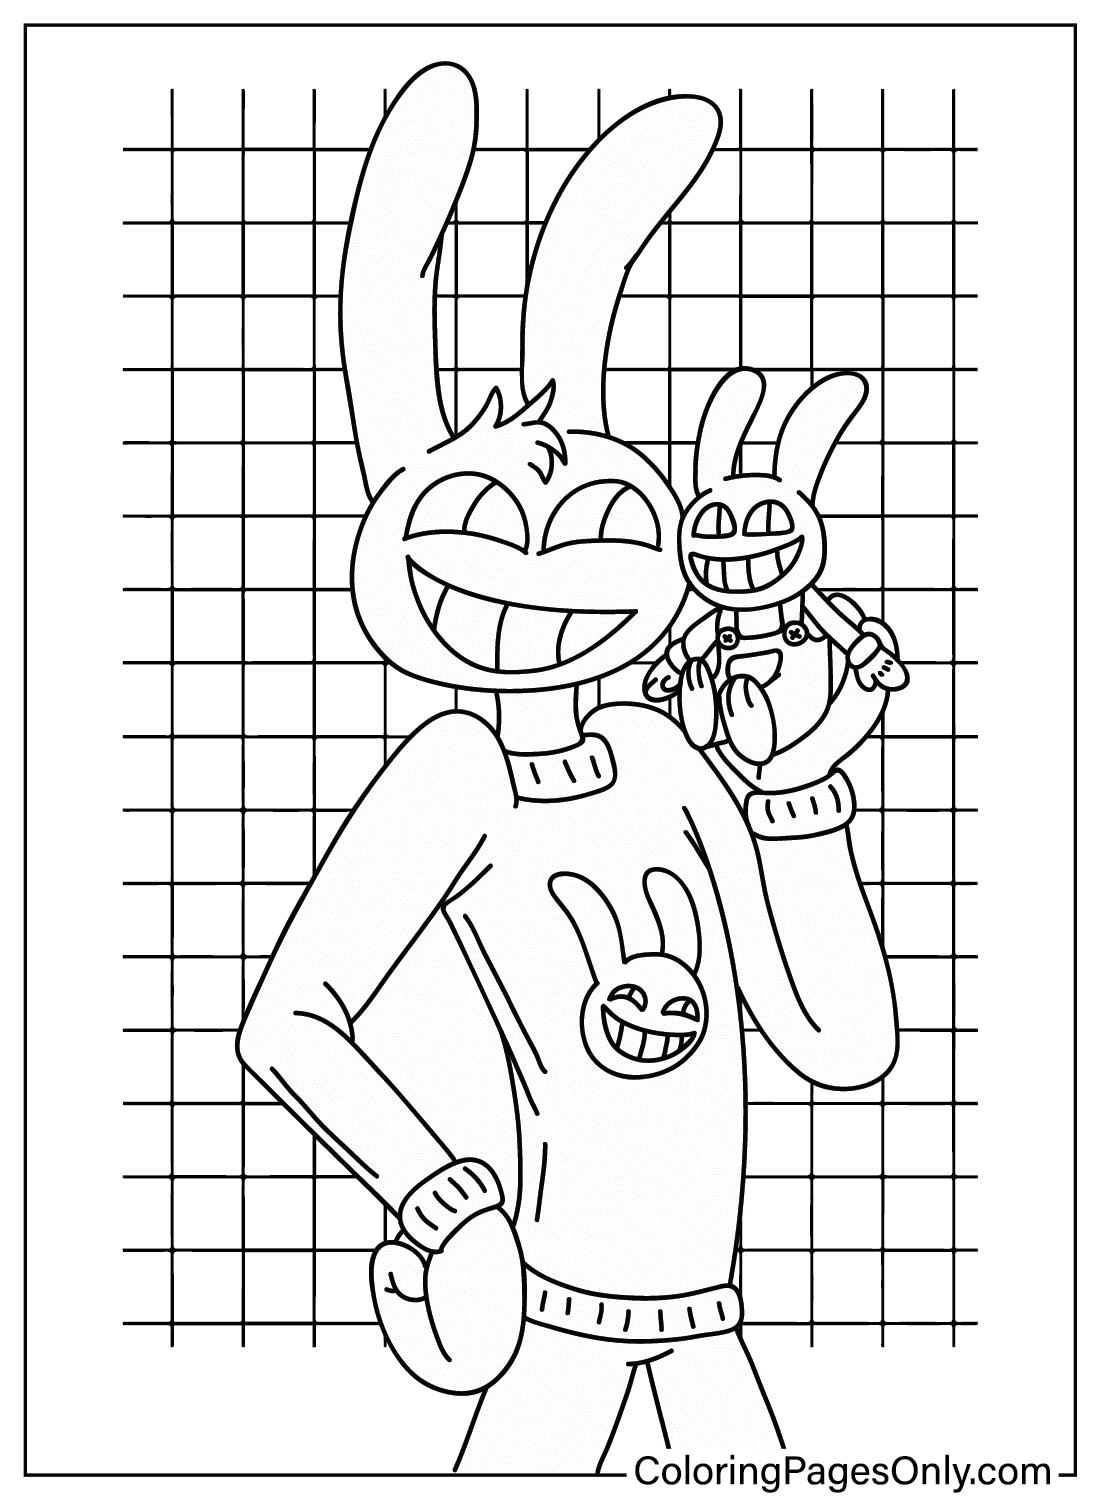 Jax Coloring Page from Jax